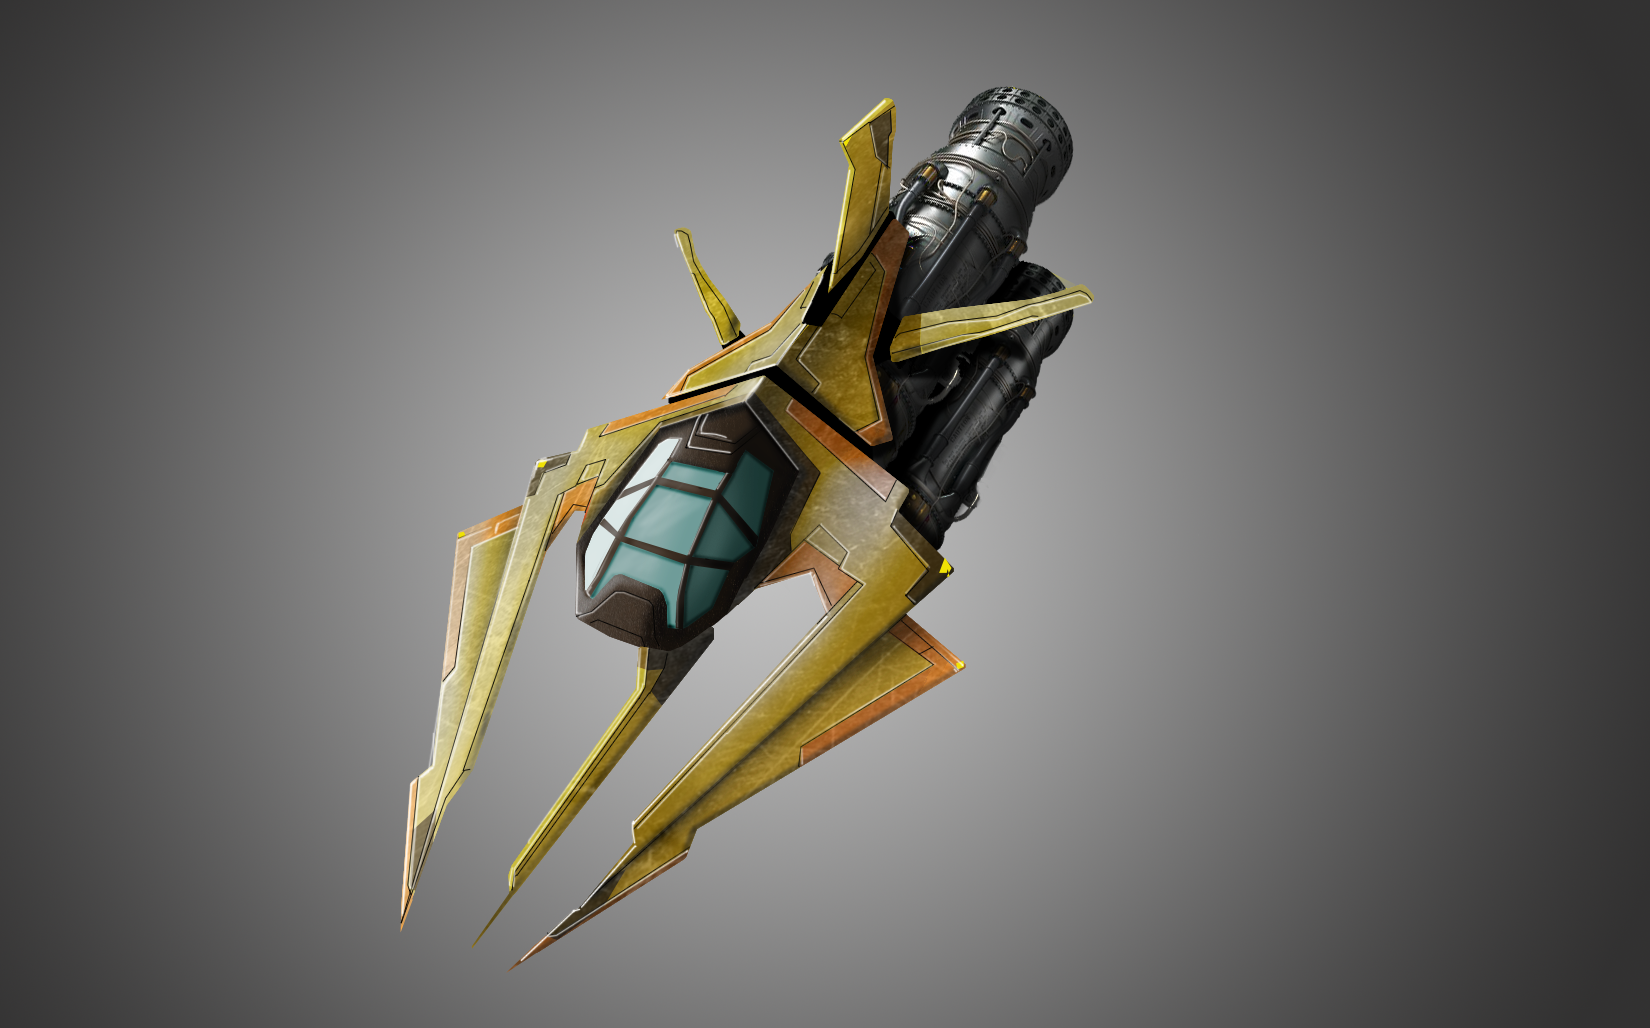 Concept art of an enemy interceptor for our title